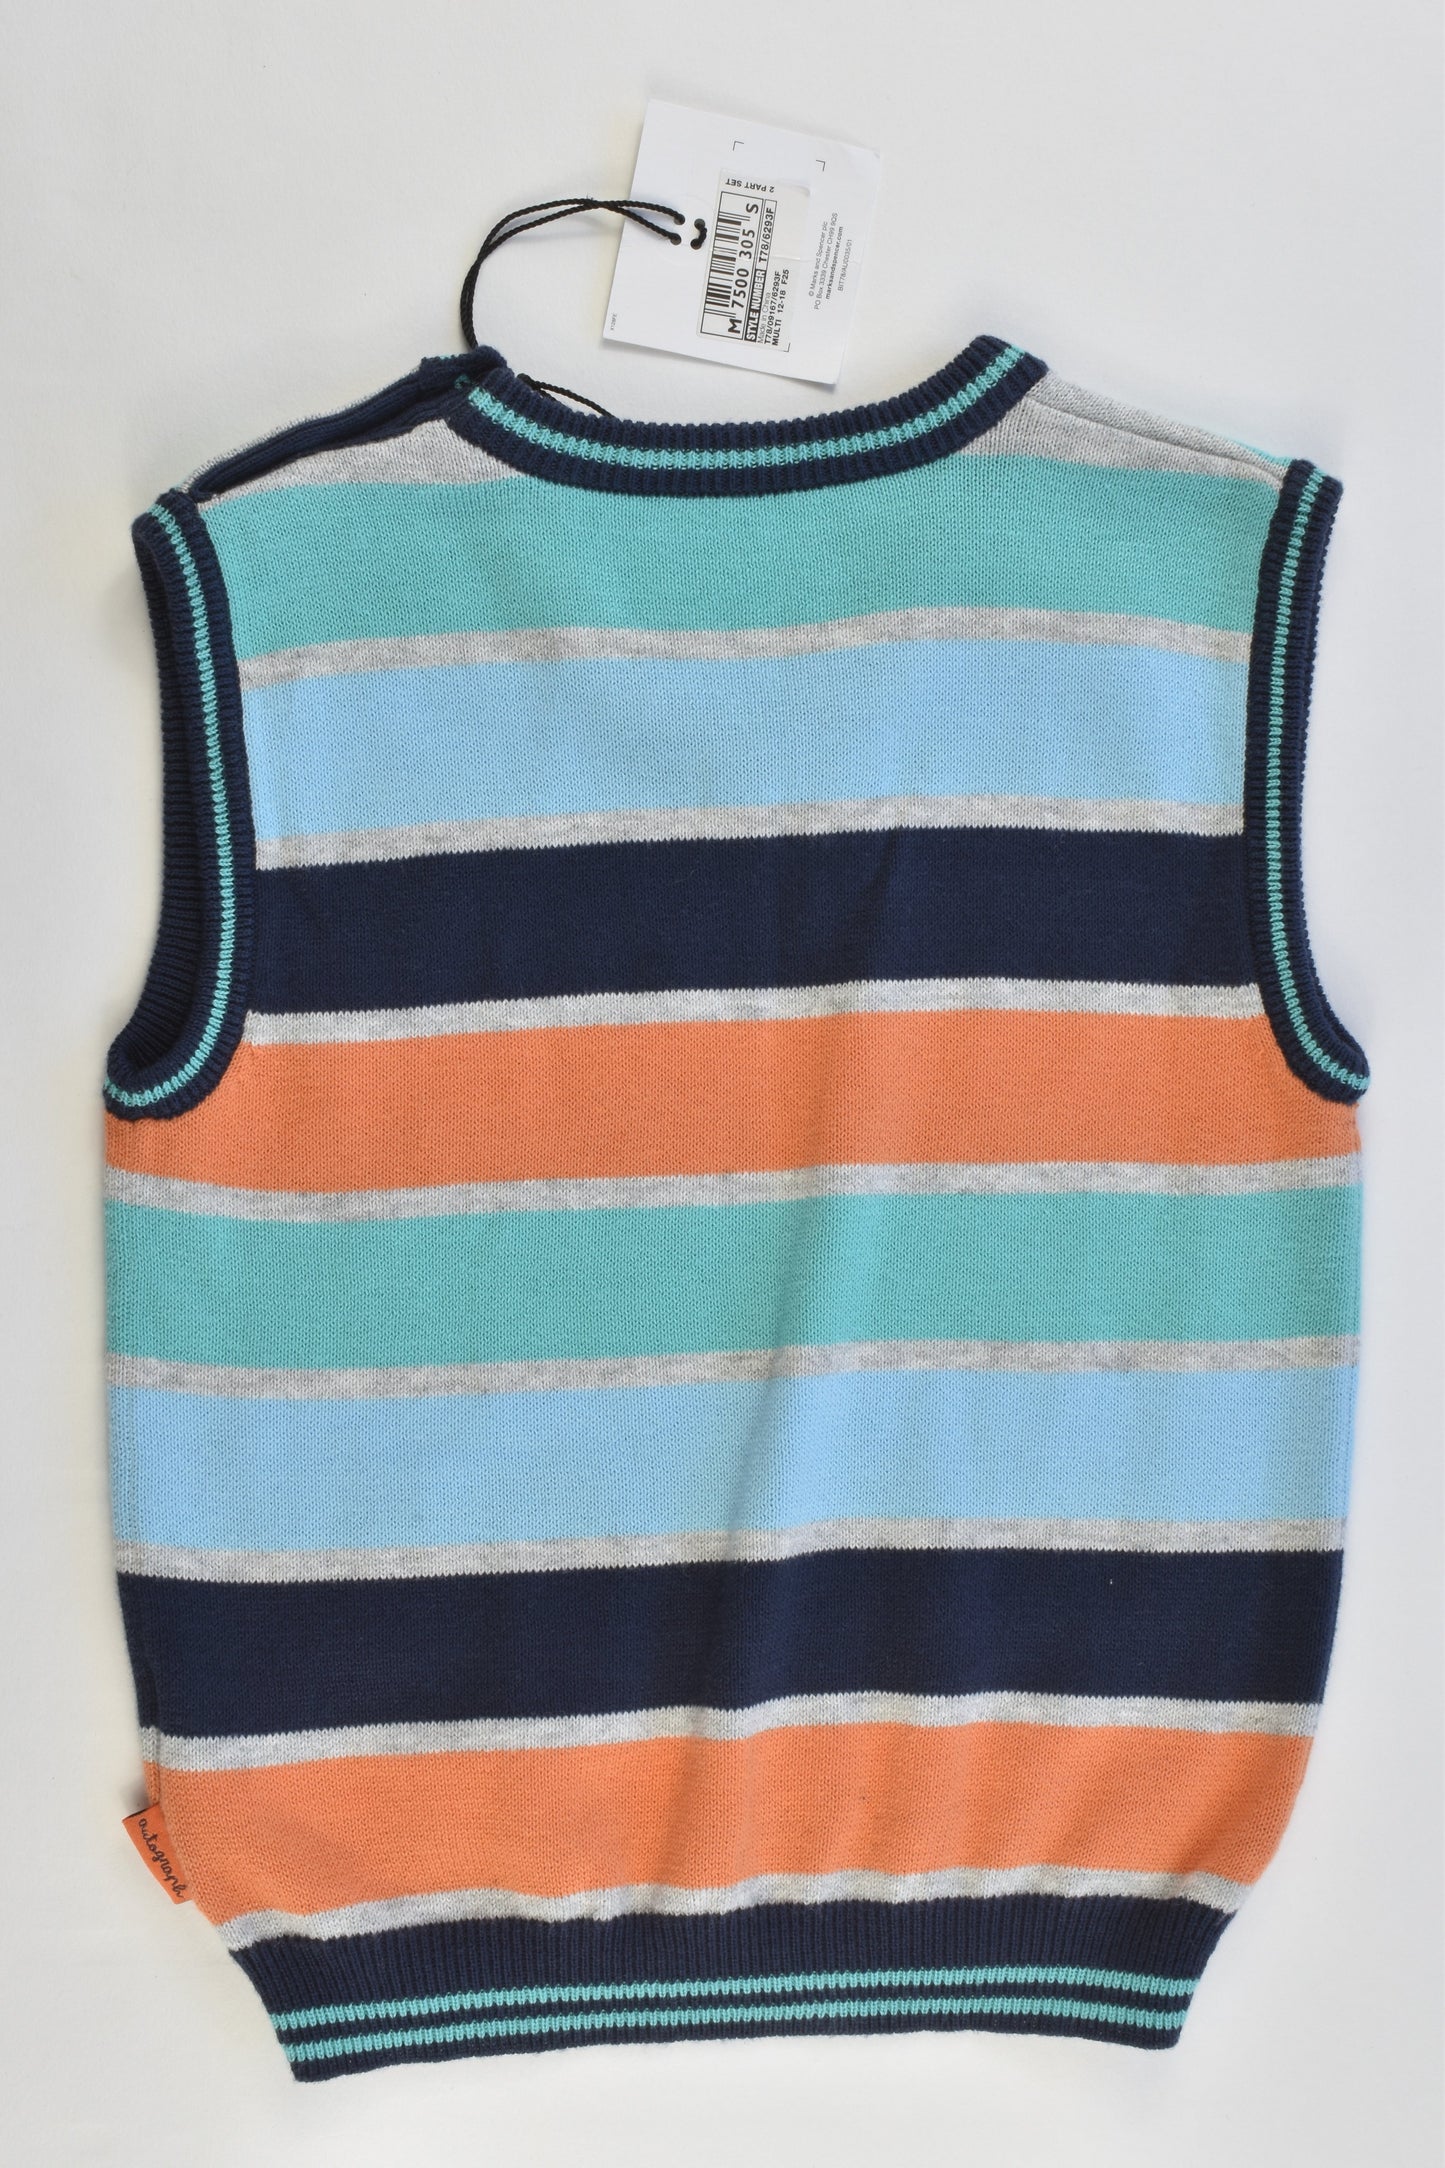 NEW Autograph by Marks & Spencer Size 12-18 months Knitted vest